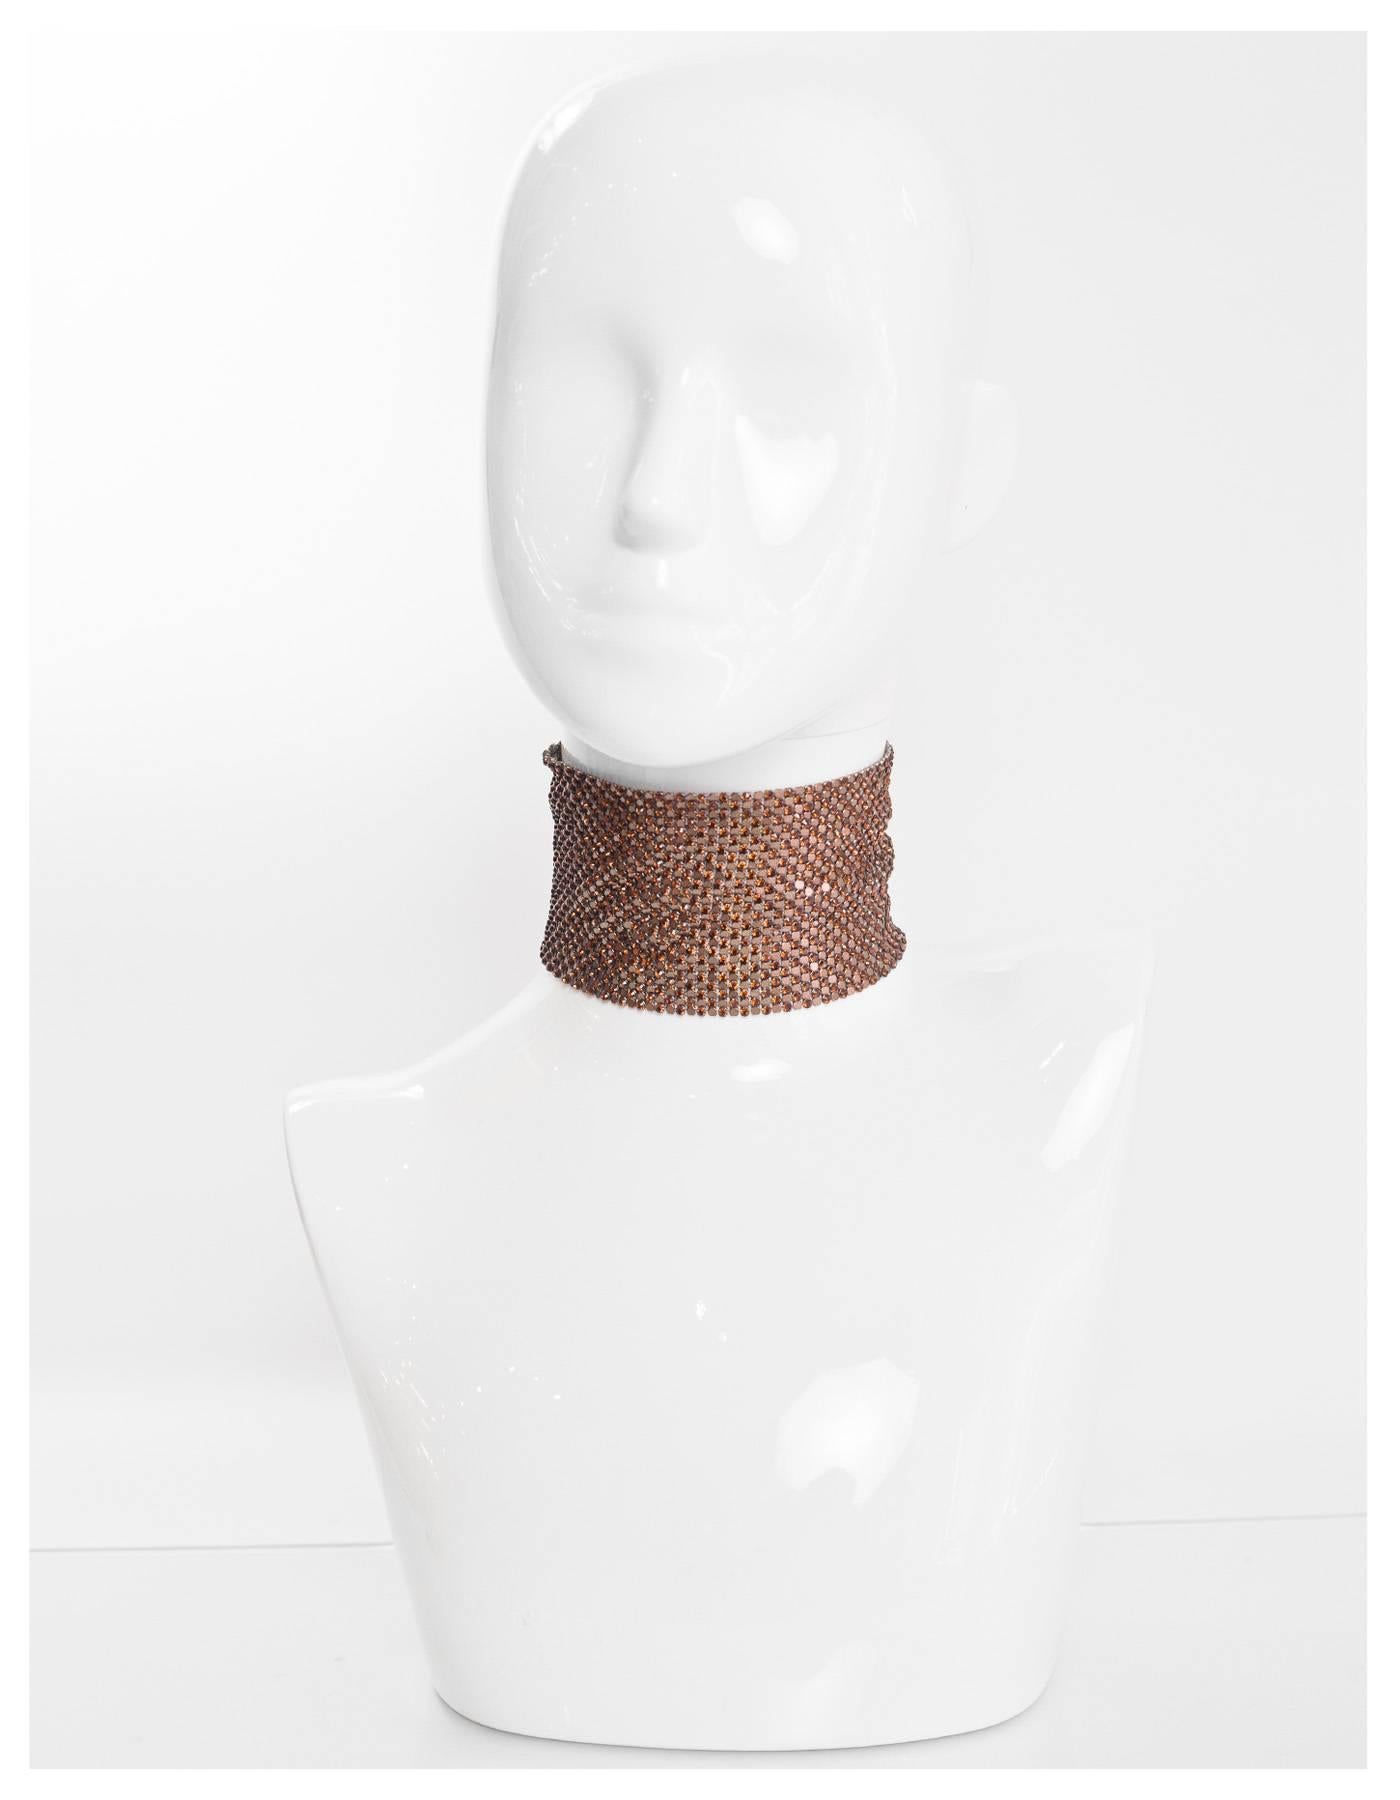 Dolce & Gabbana Bronze Extra Wide Crystal Choker

Made In: Italy
Color: Bronze
Hardware: Bronze, crystals
Materials: Mesh, crystal
Closure/Opening: Velcro closure
Overall Condition: Excellent- like new

Measurements:
Length: 16"
Width: